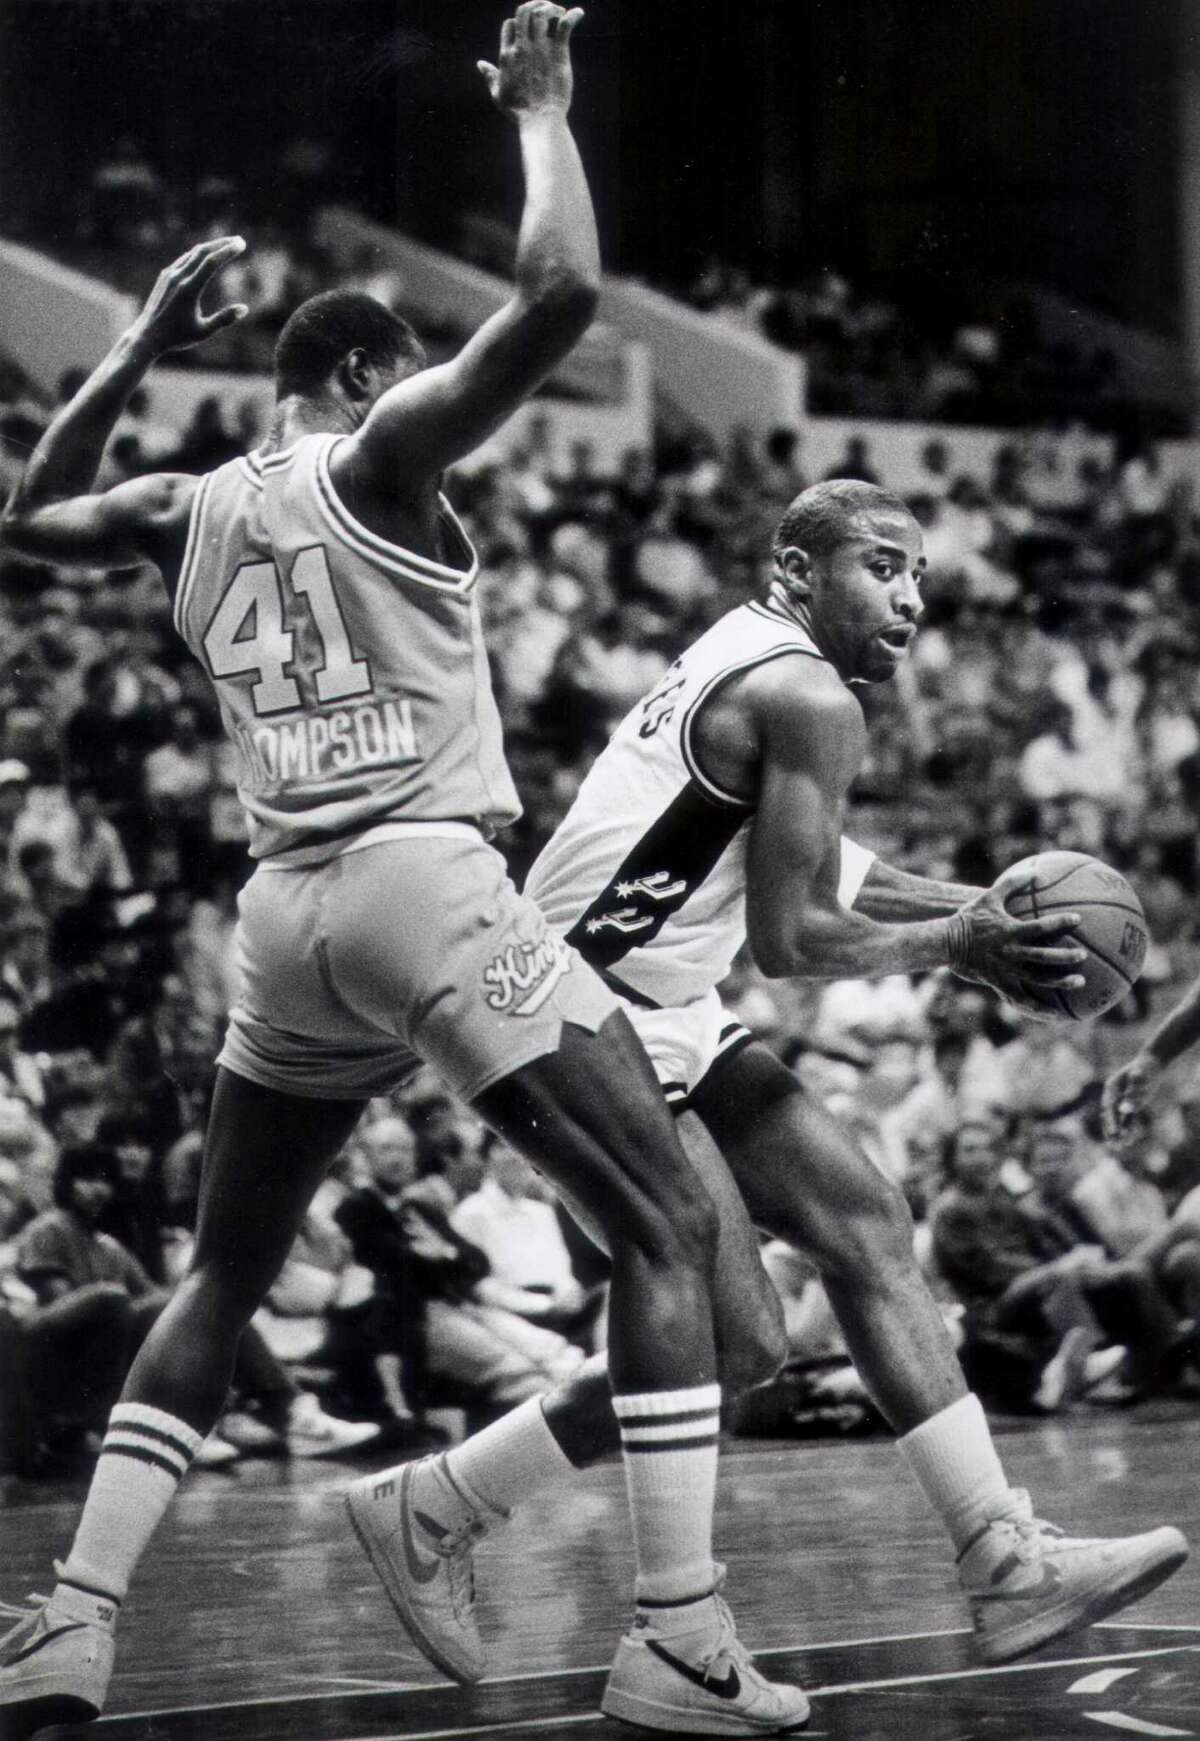 Alfredrick Hughes was with the Spurs in the 1985 season.